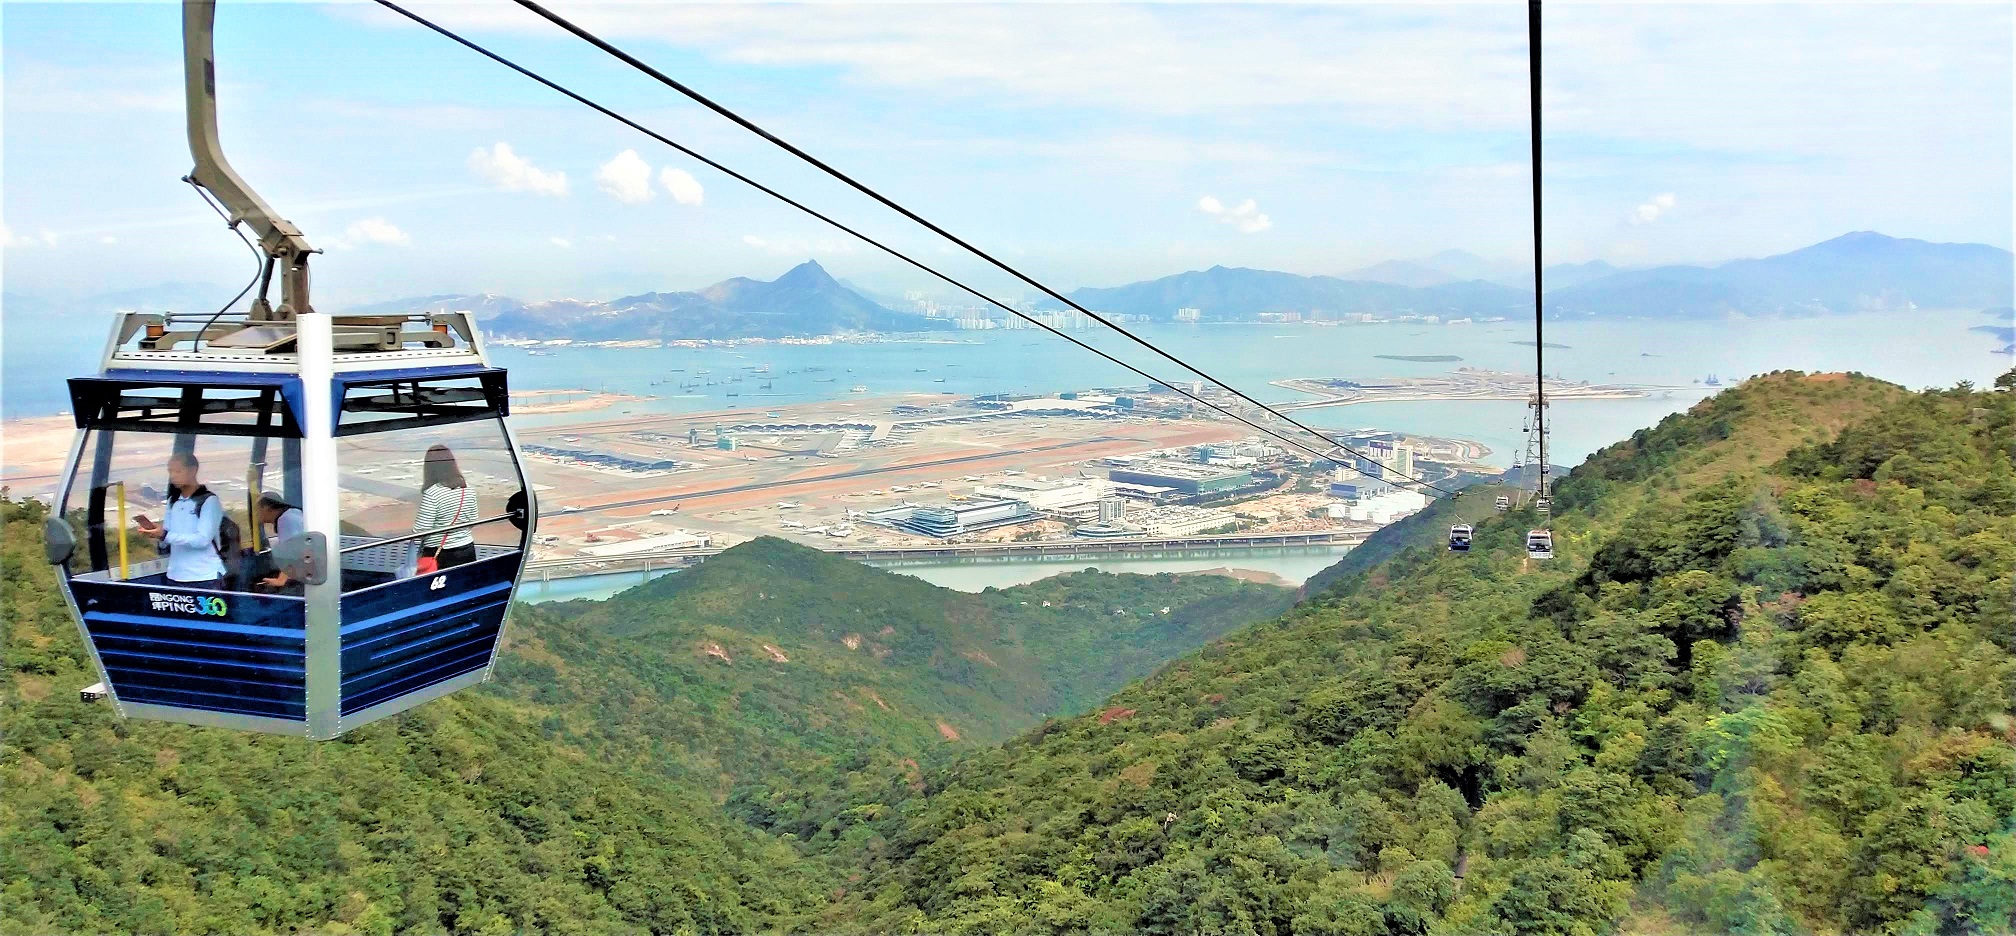 Castle Peak from Ngong Ping Cable Car